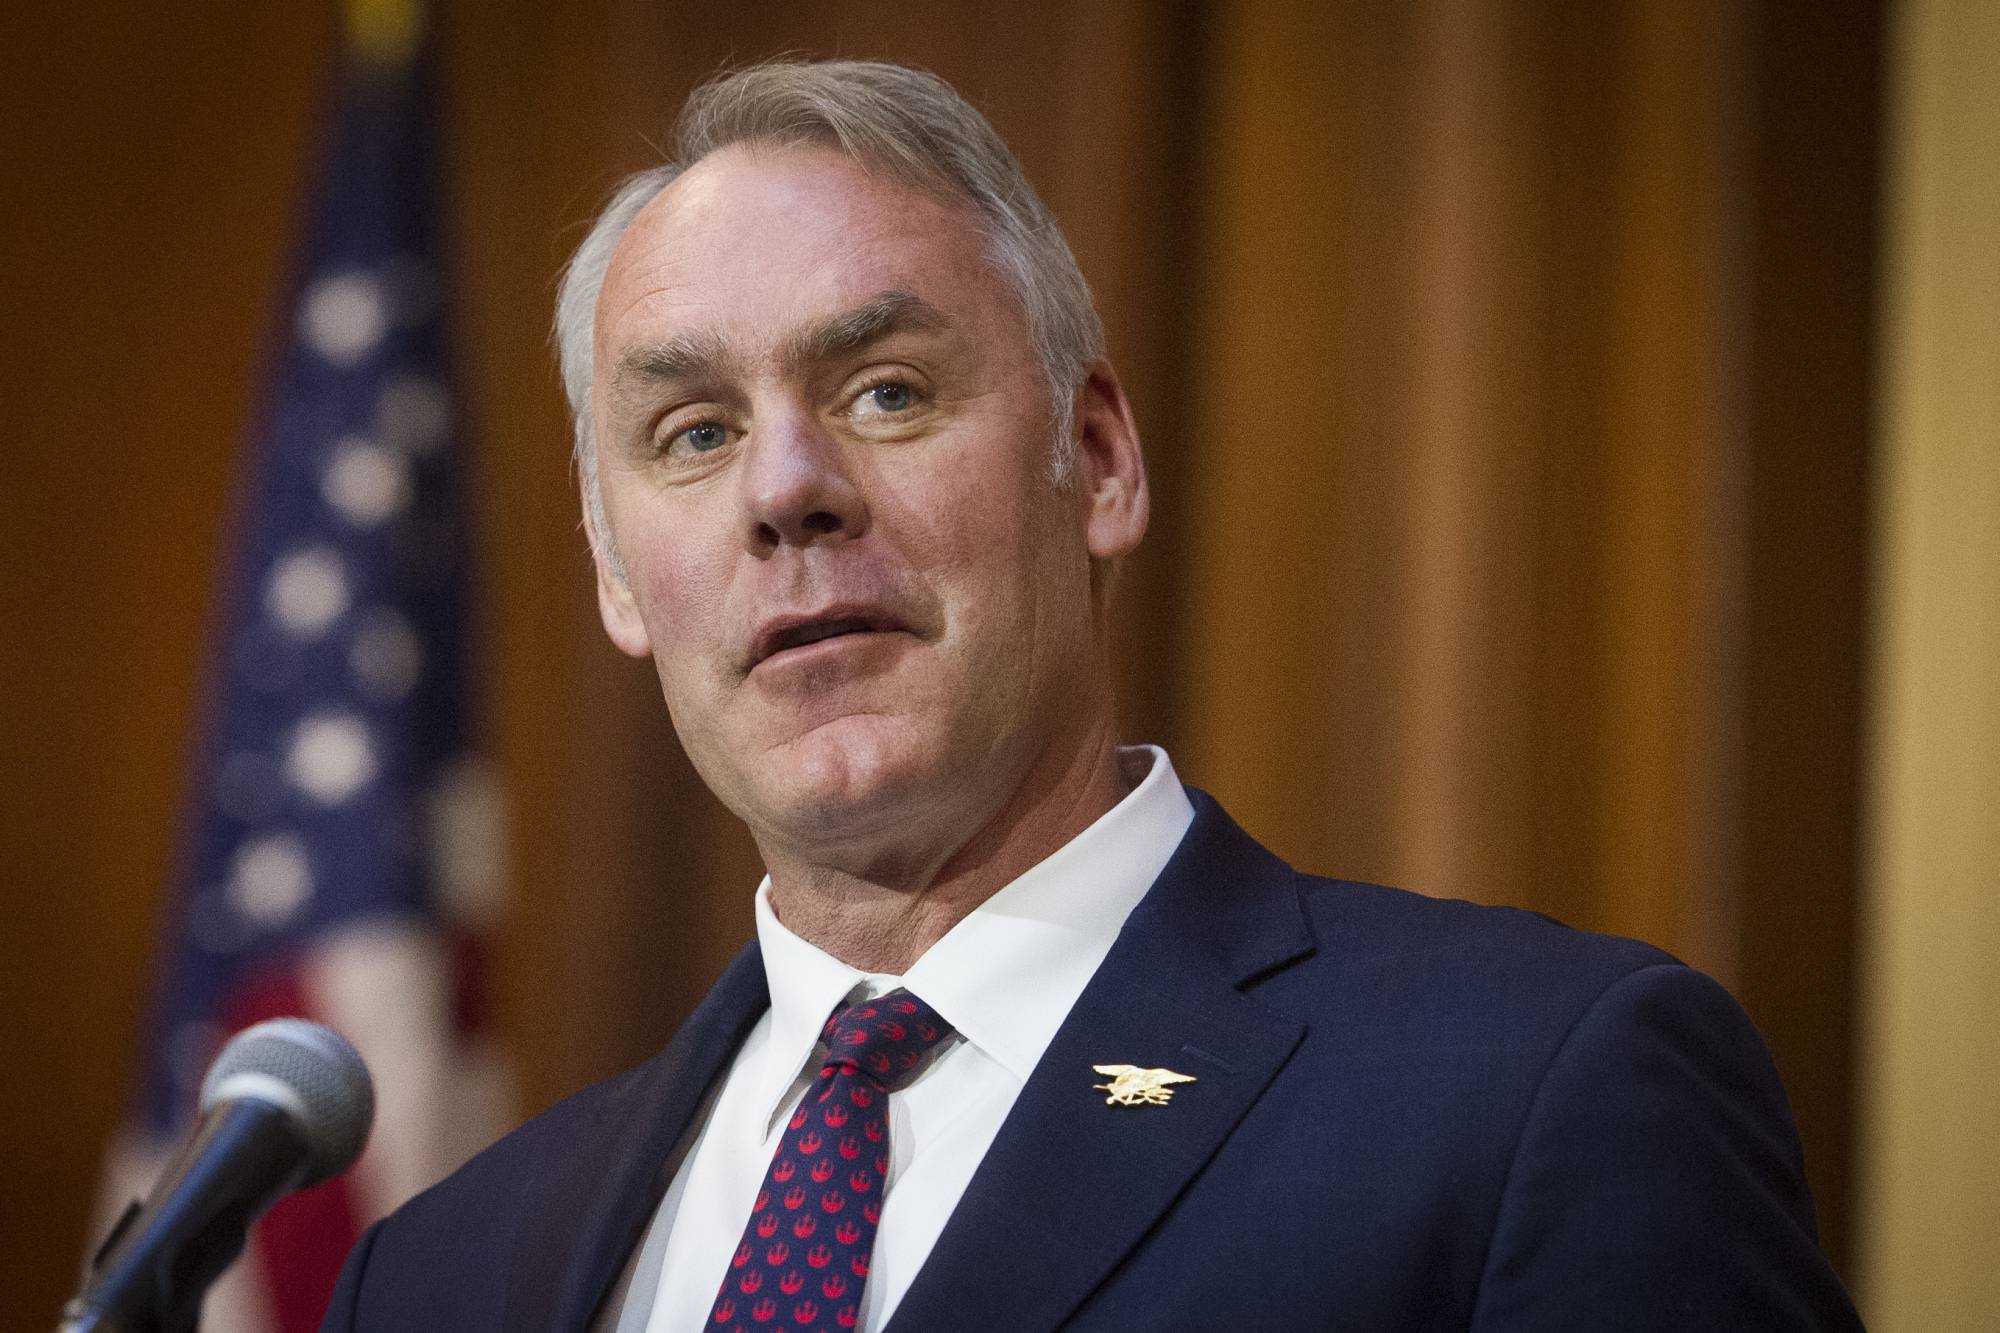 FILE - In this Dec. 11, 2018, file photo, Secretary of the Interior Ryan Zinke speaks after an order withdrawing federal protections for countless waterways and wetland was signed, at EPA headquarters in Washington. Former Interior Secretary Zinke has gotten a job with a private investment company after leaving the Trump administration amid unresolved ethics investigations. North Carolina-based Artillery One said Monday, Jan. 14, 2019, that Zinke has been hired as managing director and will pursue investing opportunities in energy, financial technology and cybersecurity. (AP Photo/Cliff Owen, File)